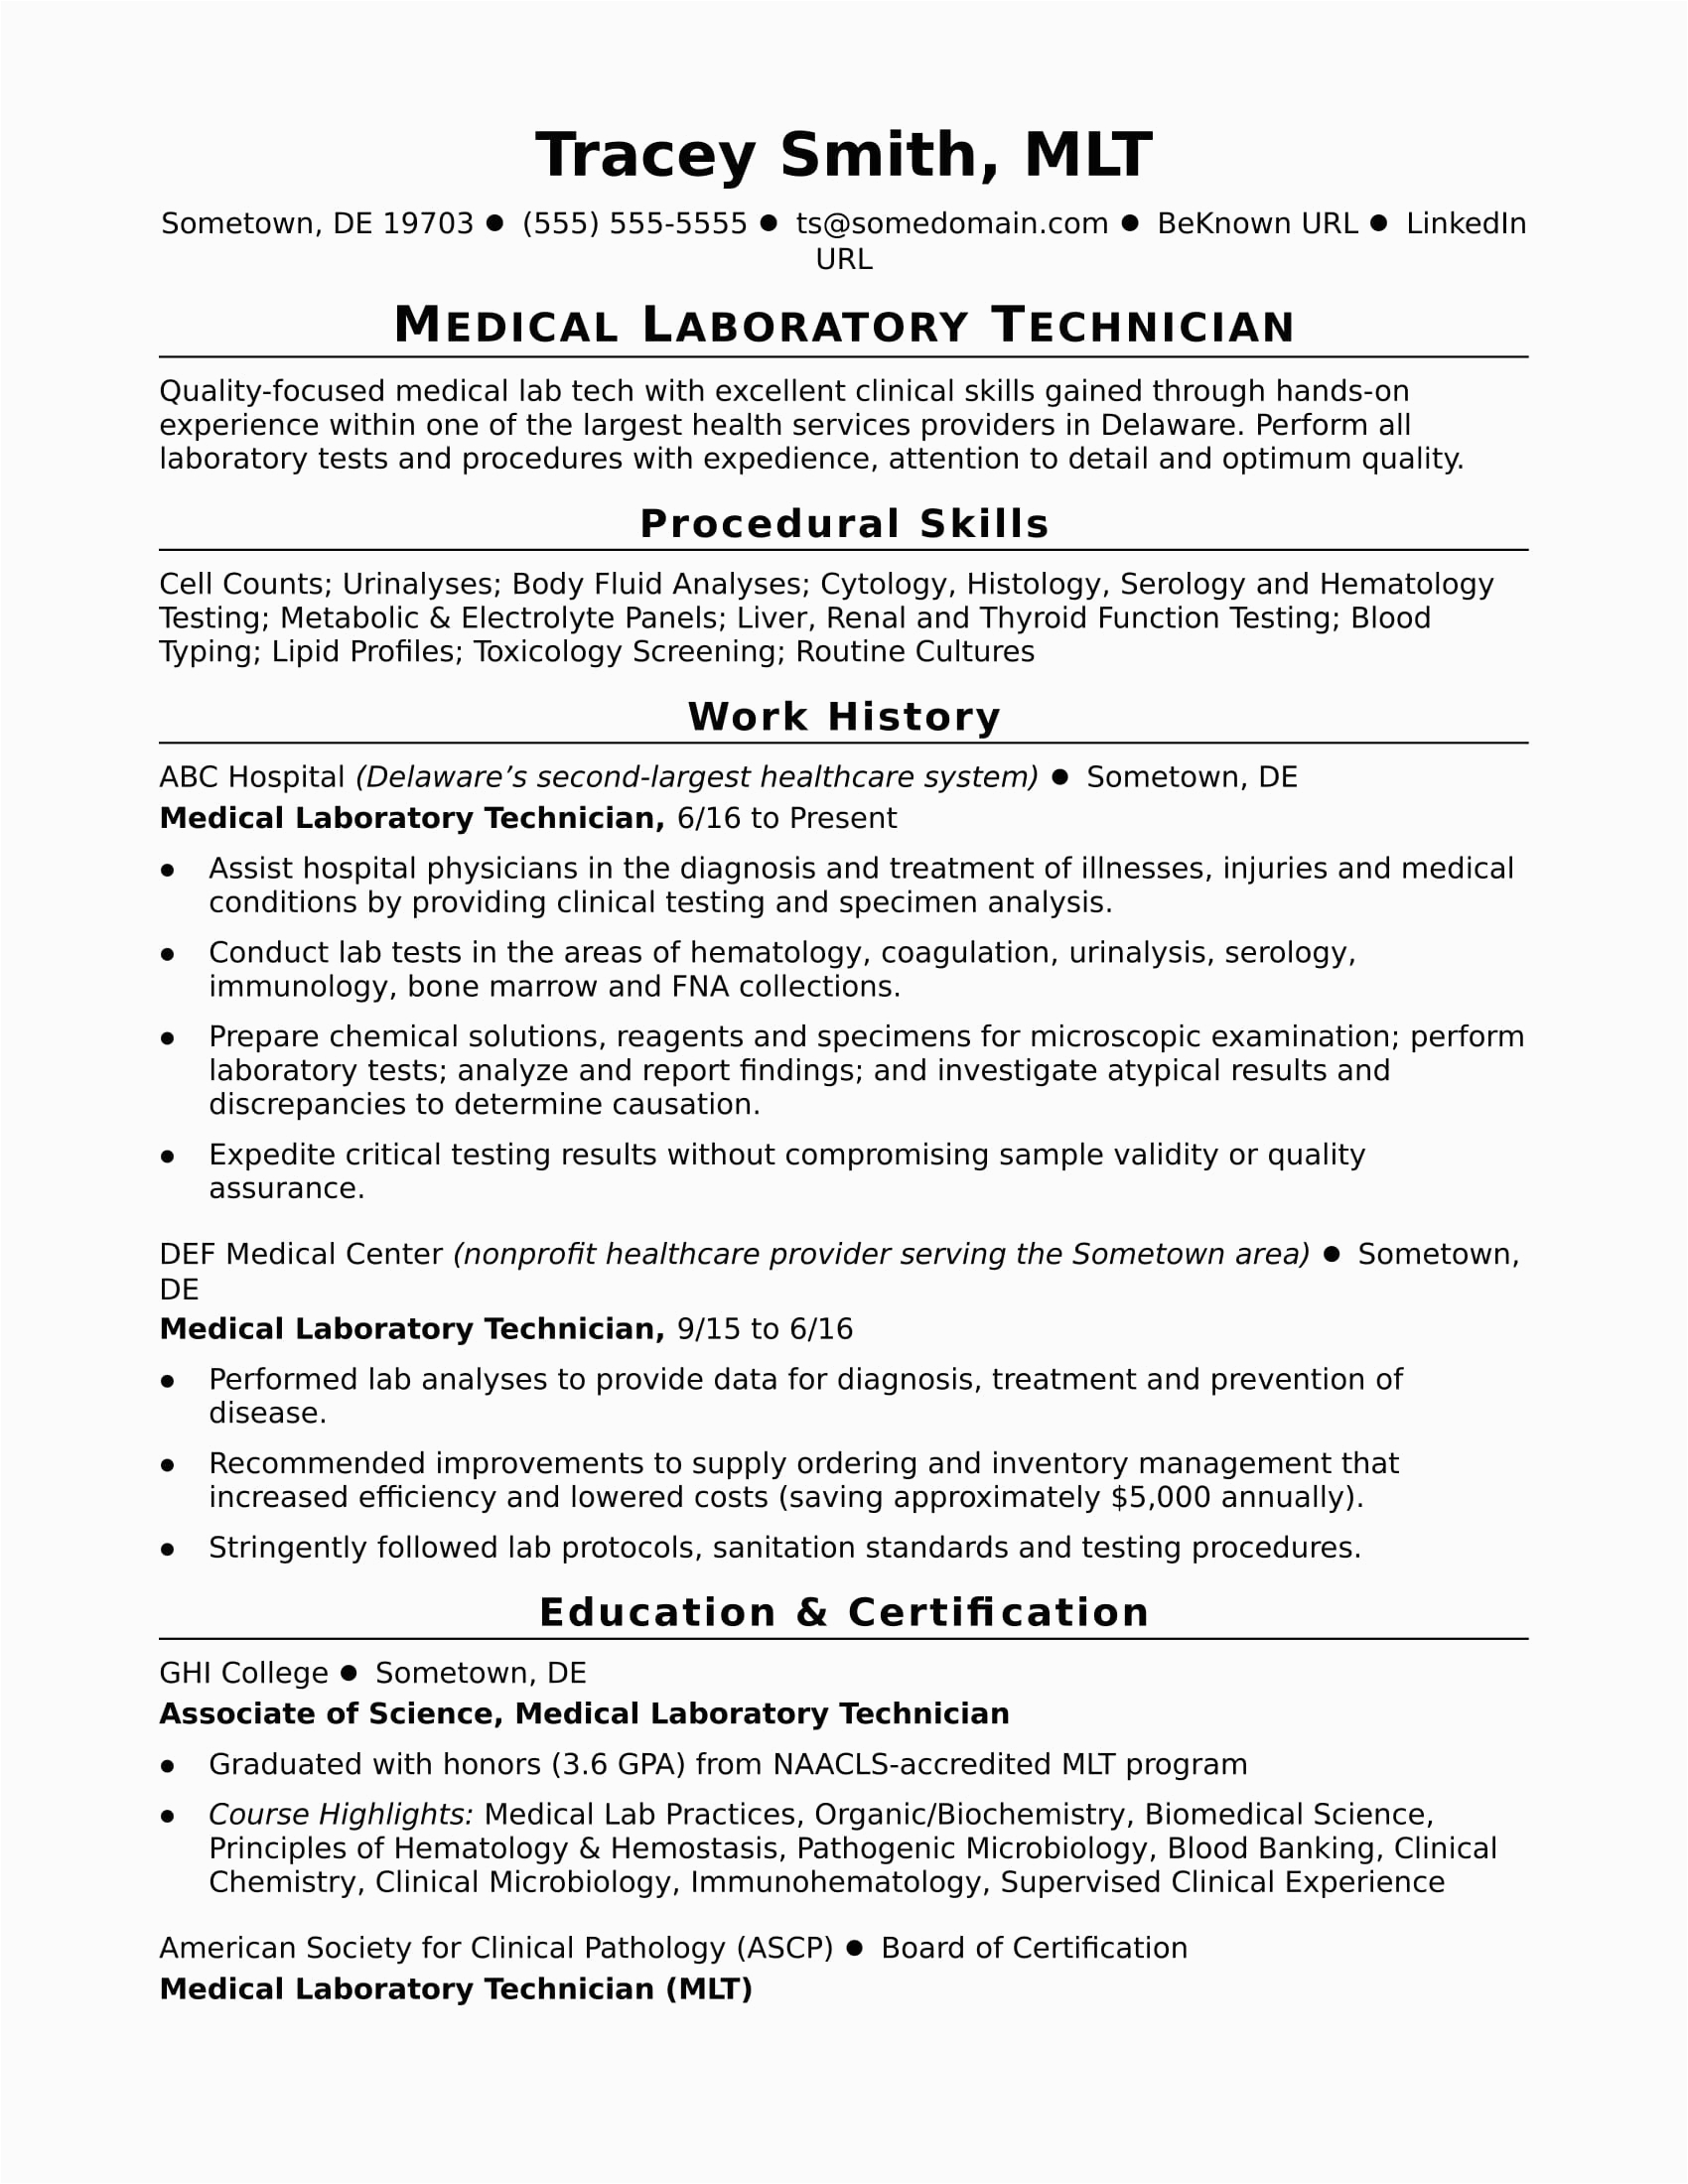 Fresh Grad Of Medtech Resume Sample Resume for Fresh Graduate Medical Technologist without Experience